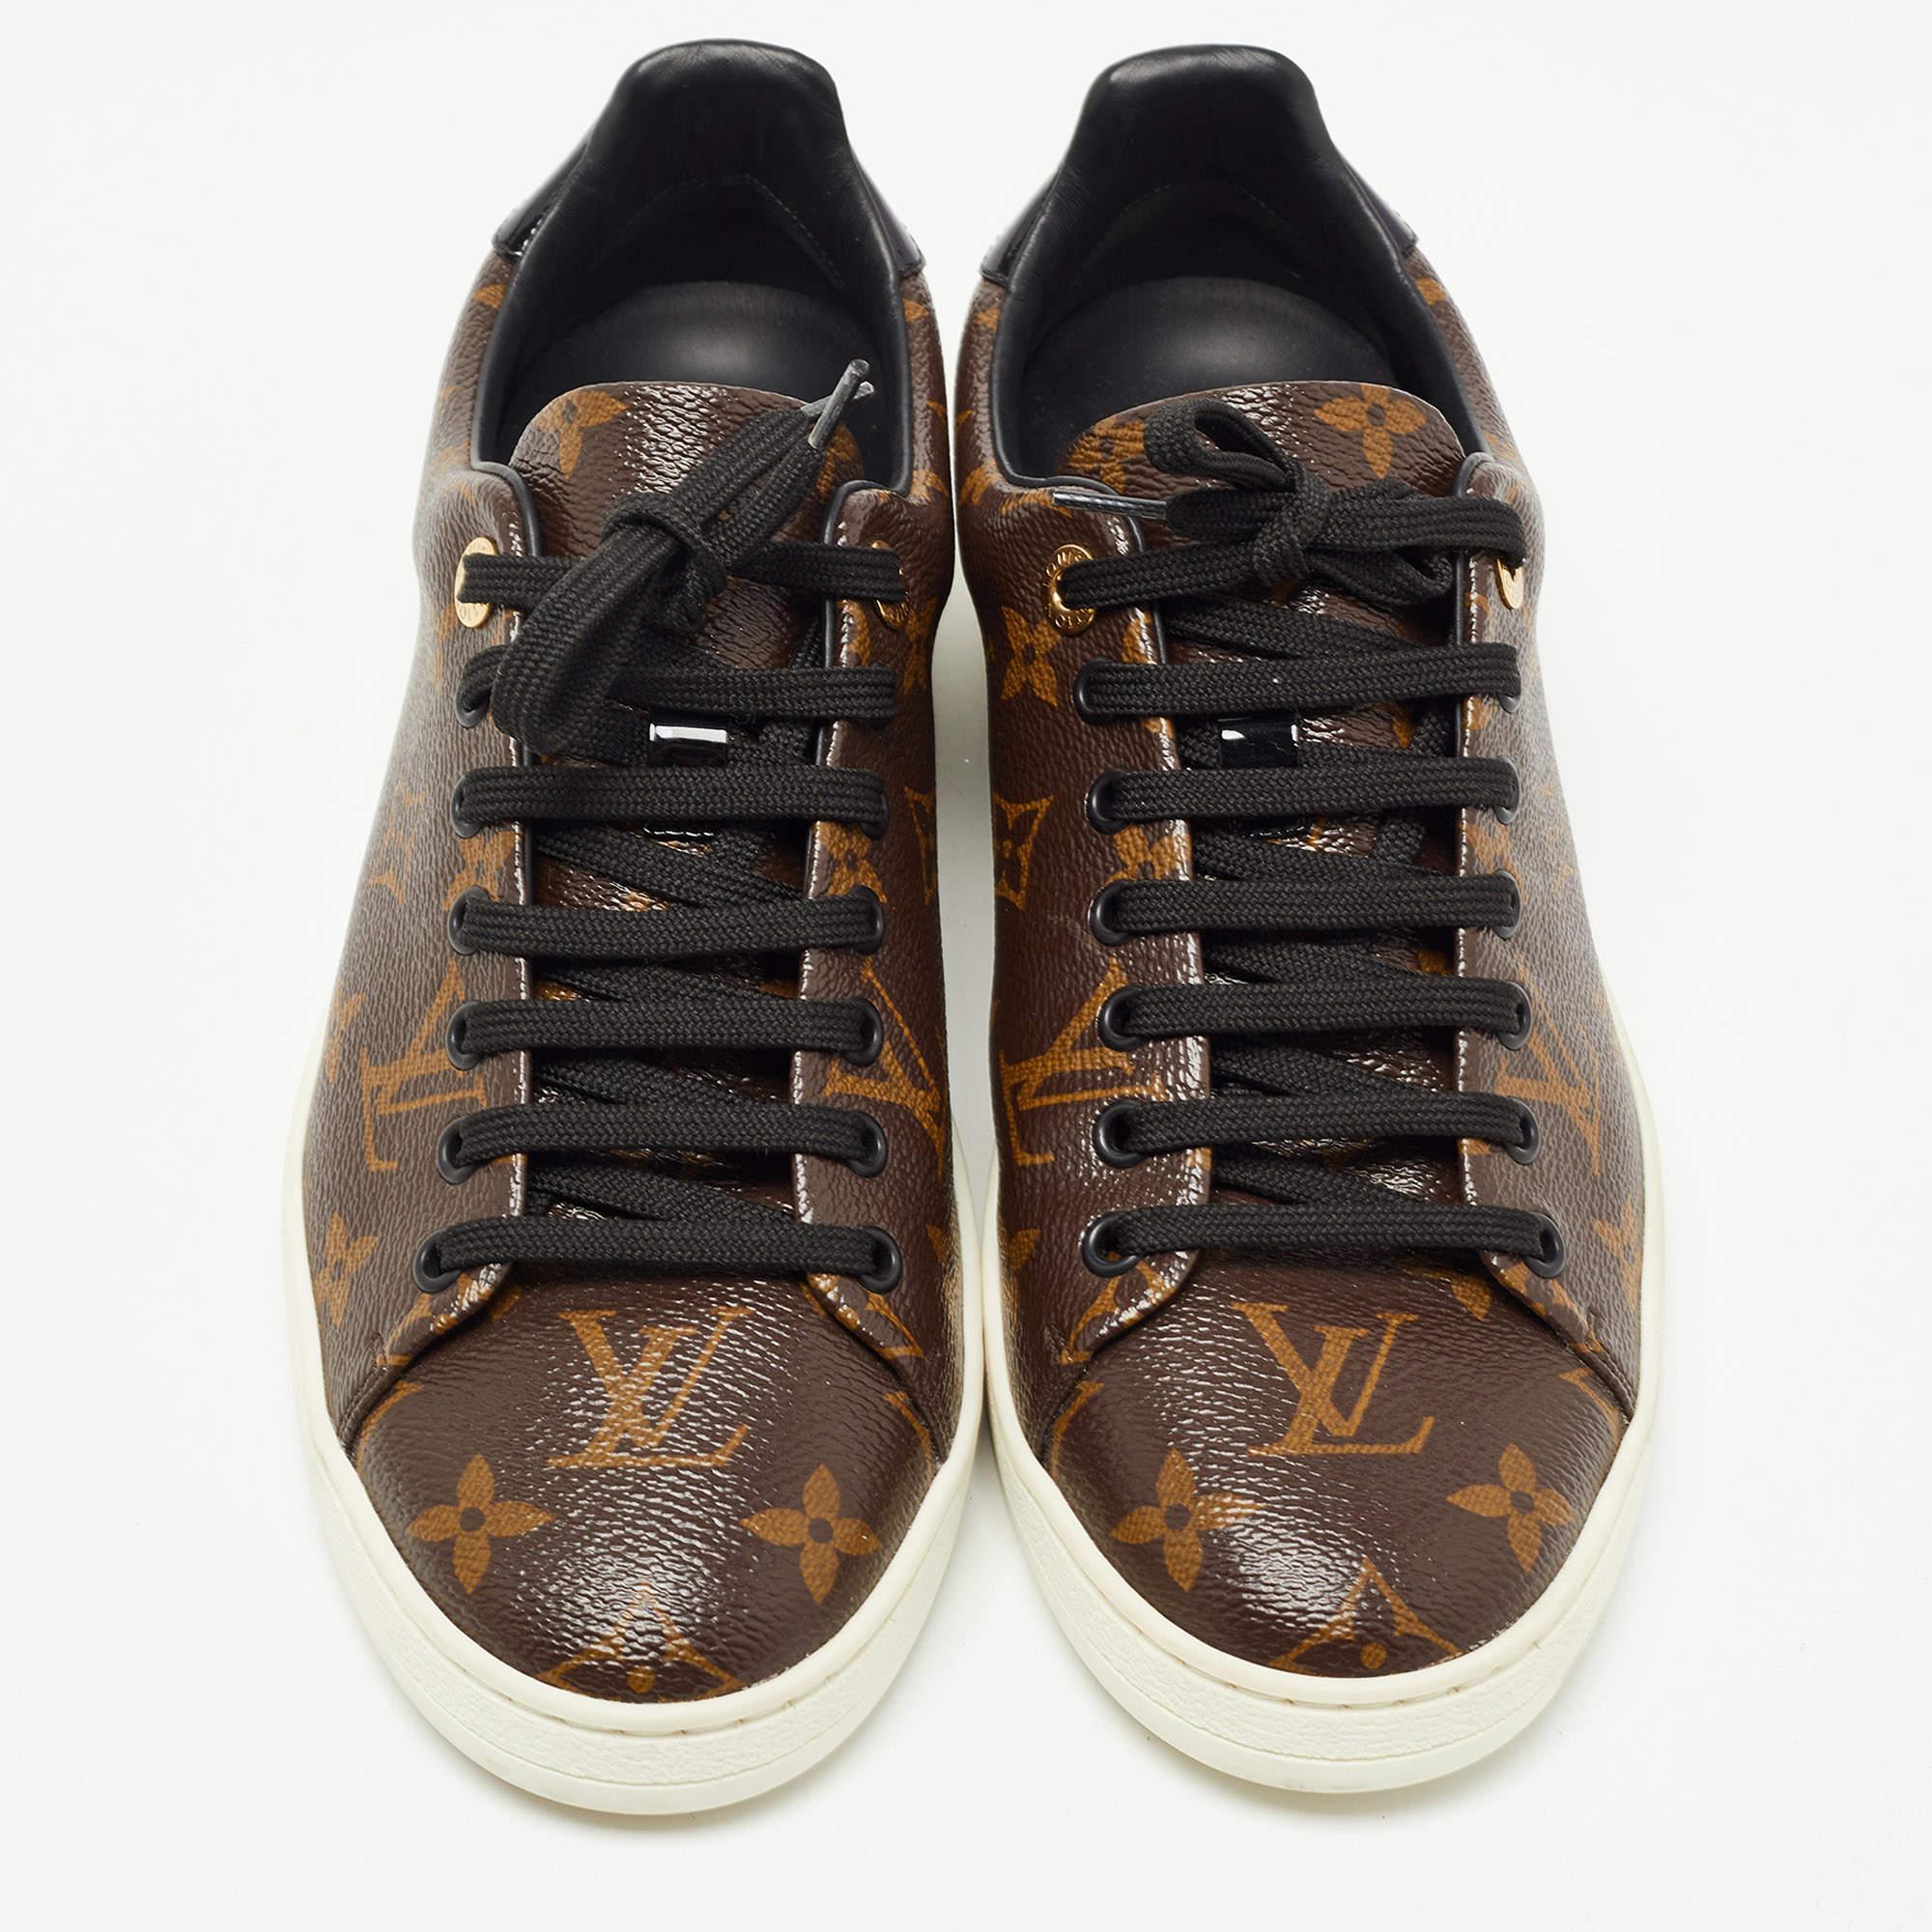 Louis Vuitton Monogram Canvas and Patent Leather Frontrow Sneakers Size 38.5 1